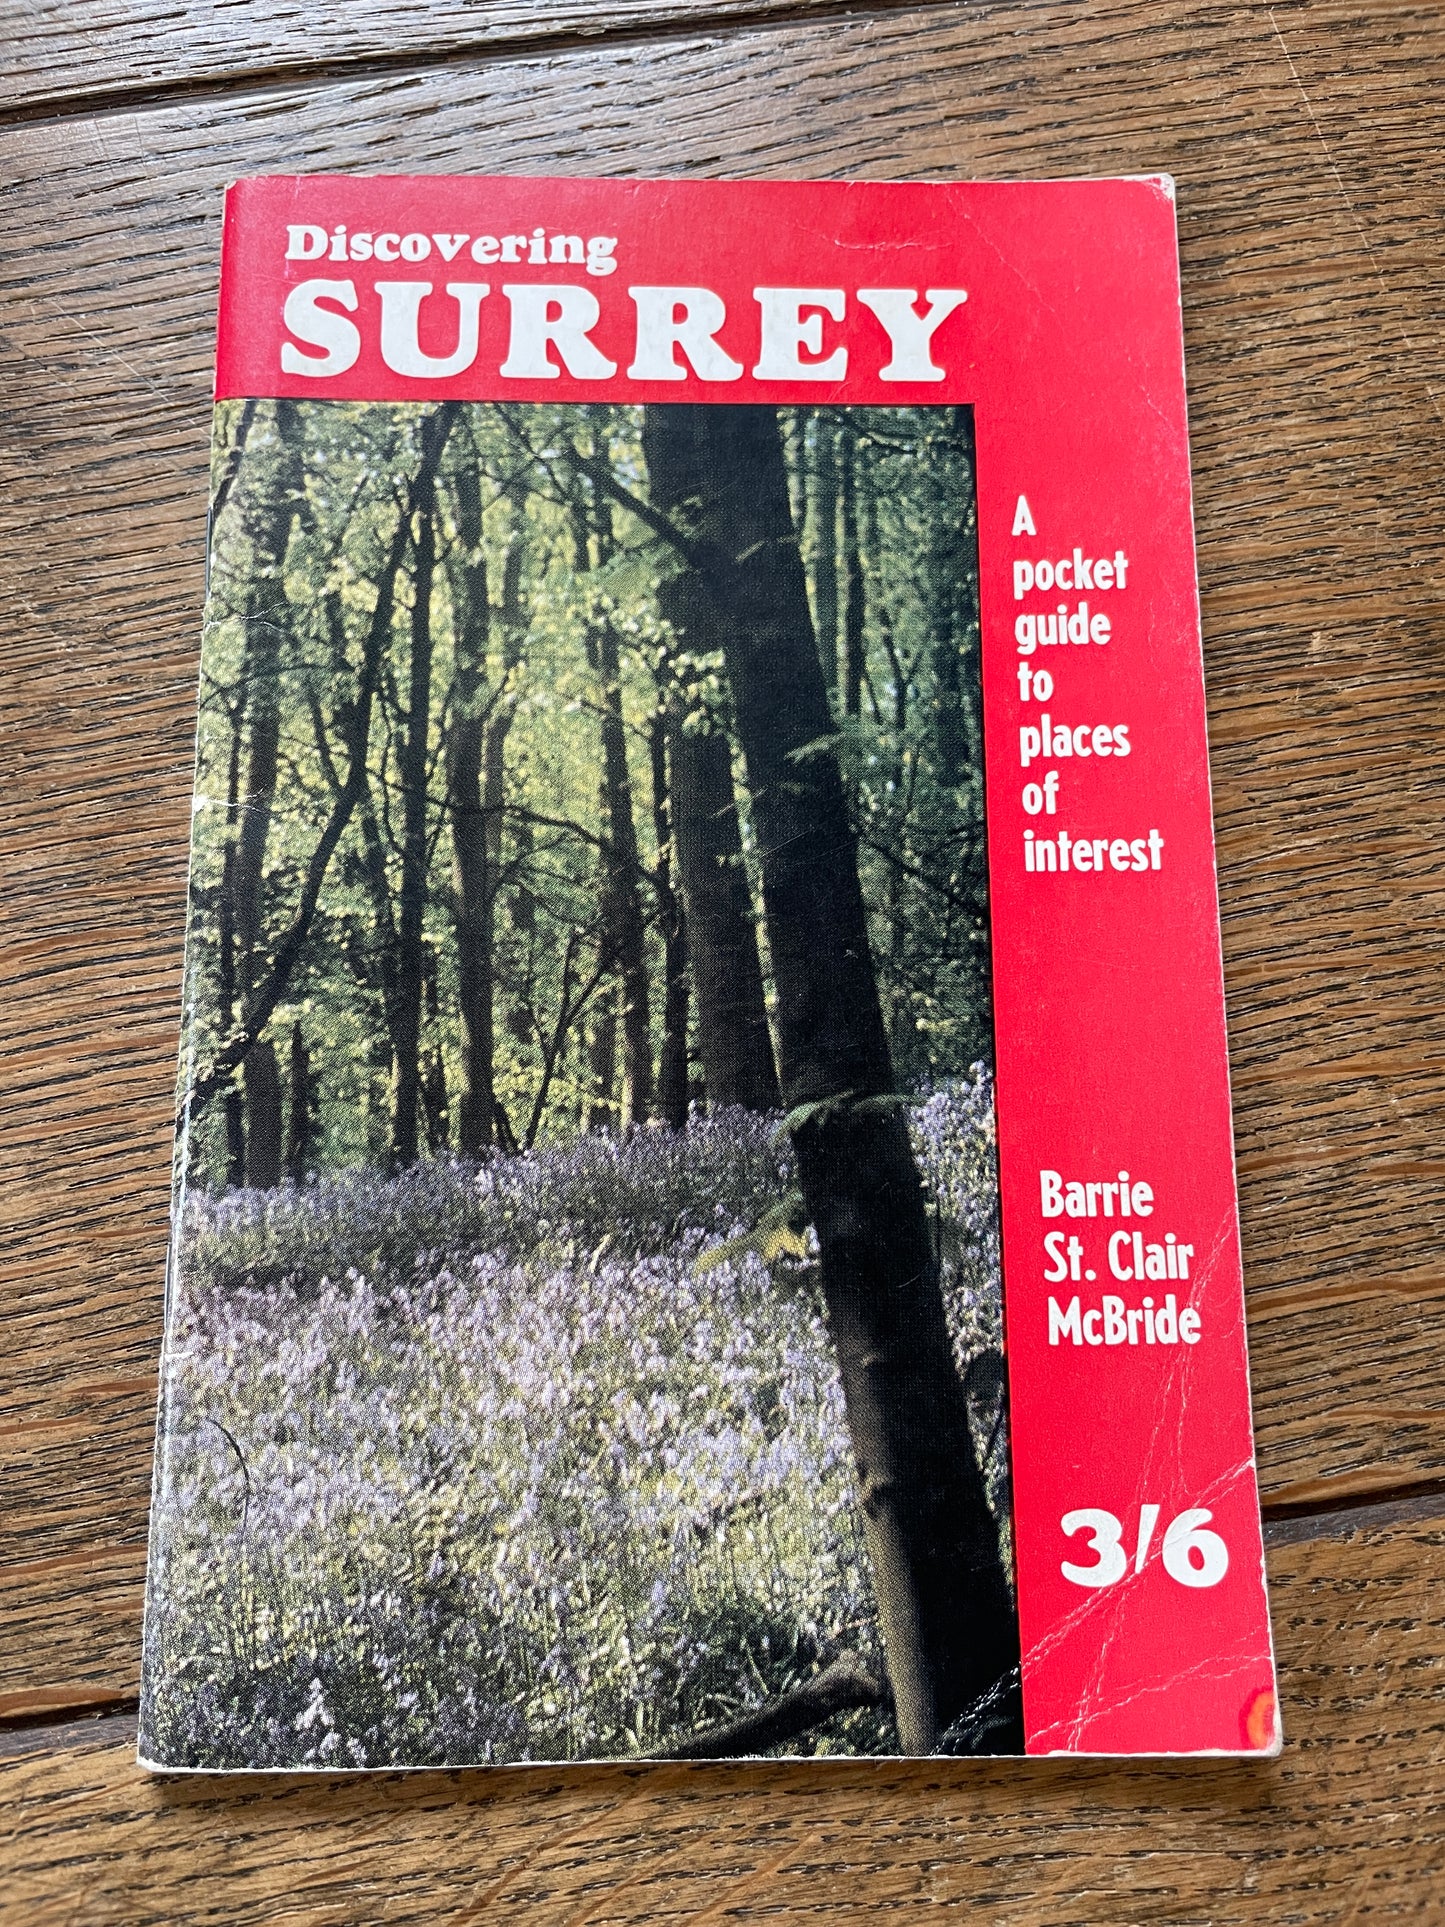 Discovering Surrey by Barrie St Clair McBride